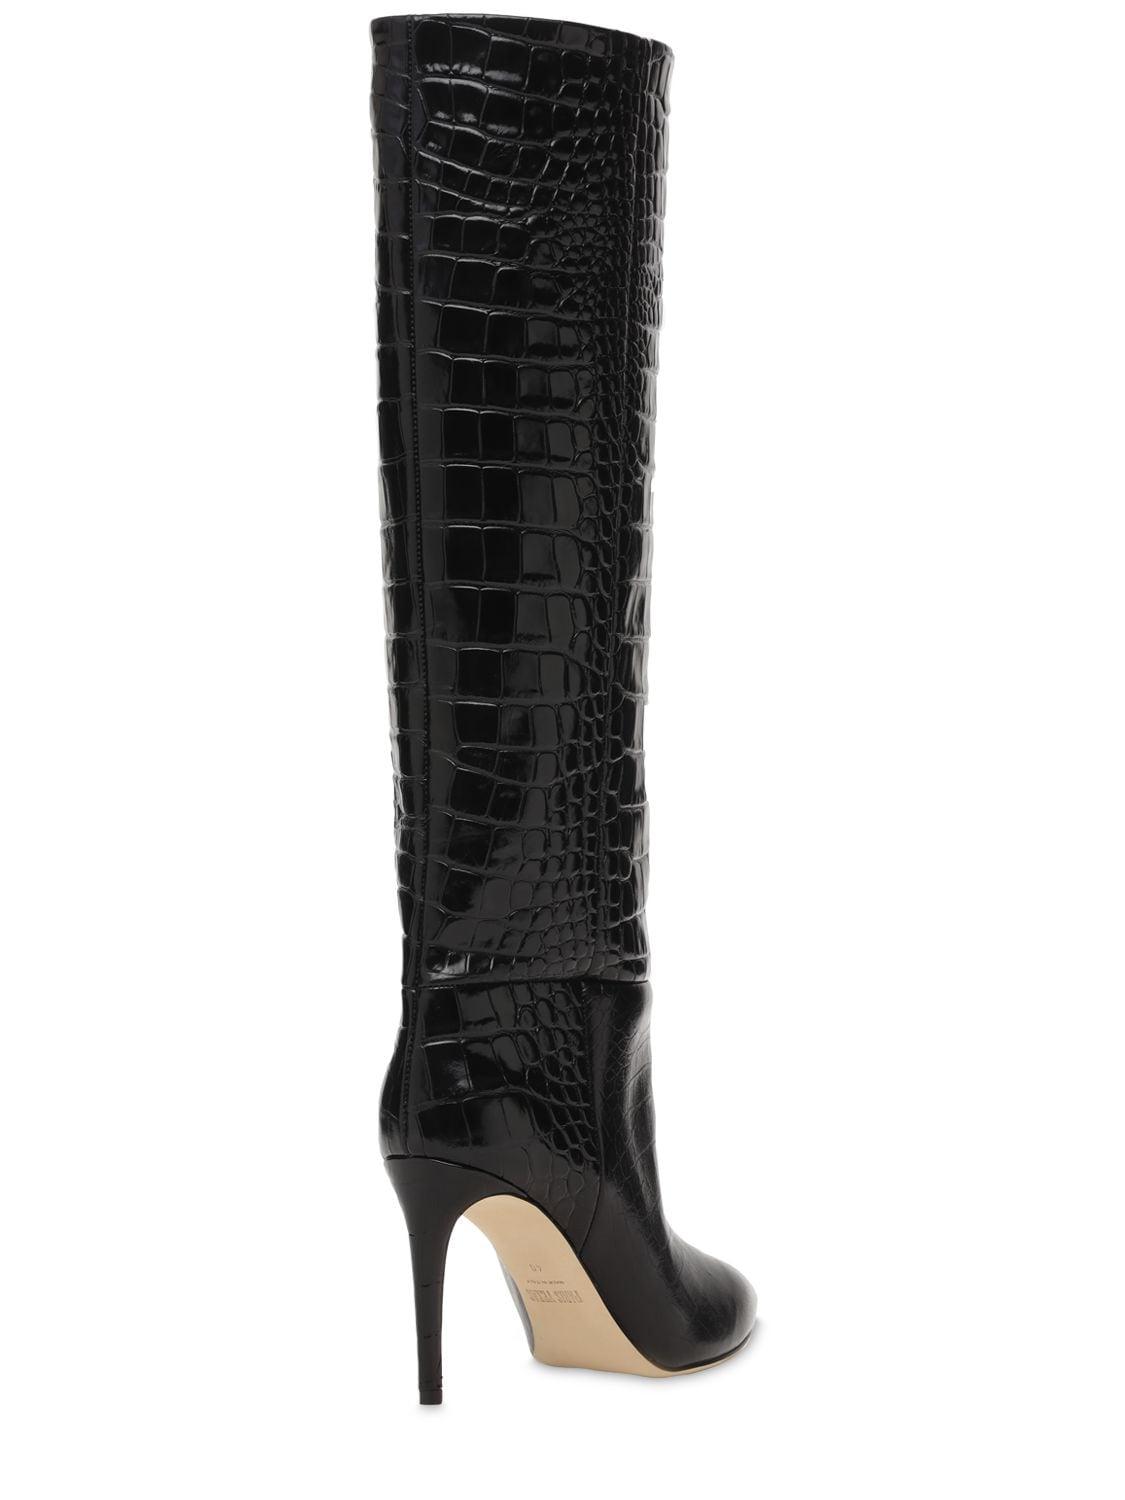 Paris Texas 85mm Croc Embossed Leather Tall Boots in Black | Lyst